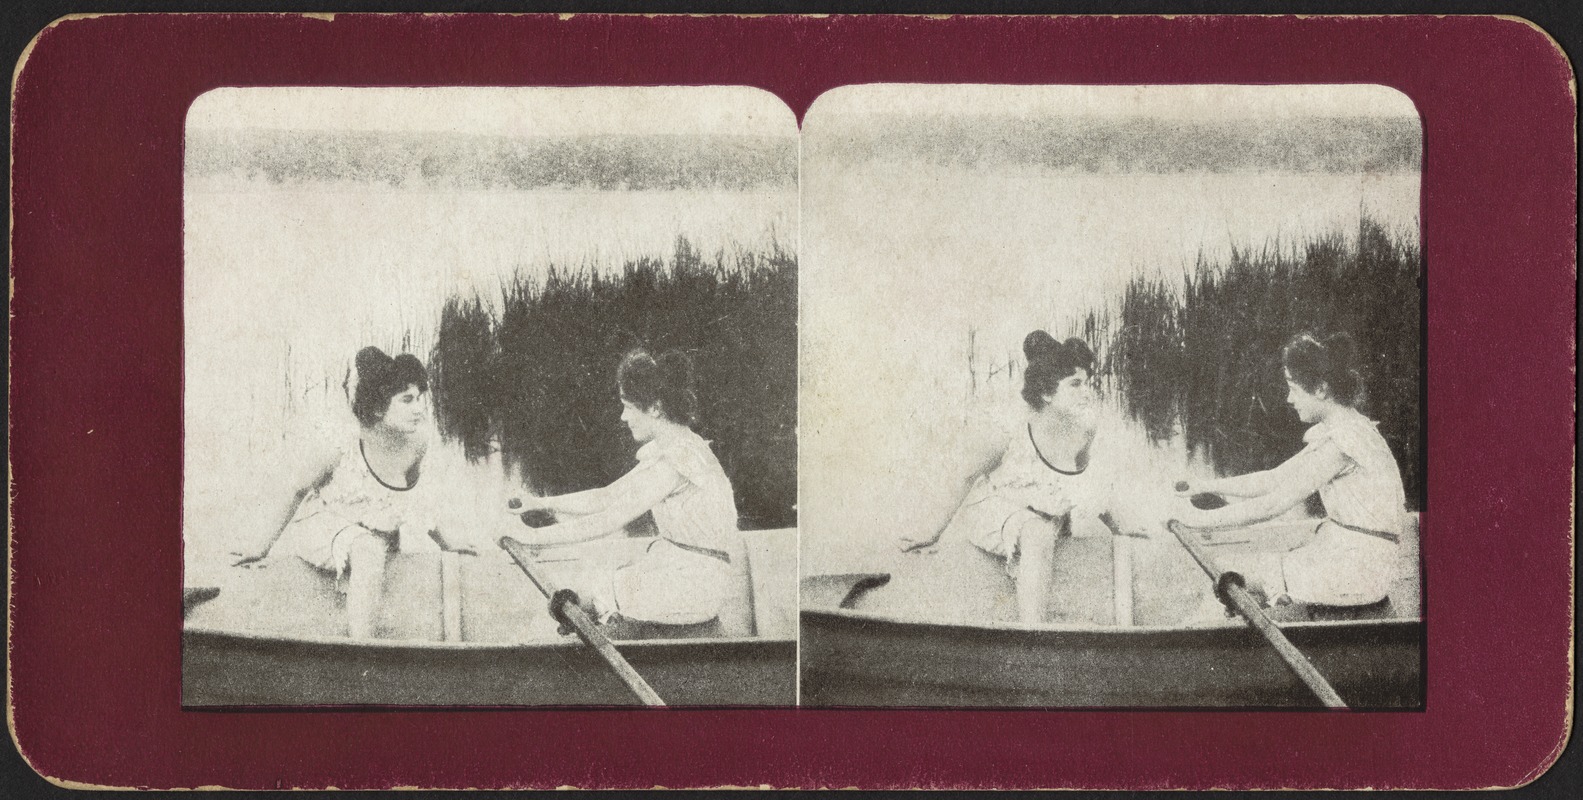 Two women rowing from shore